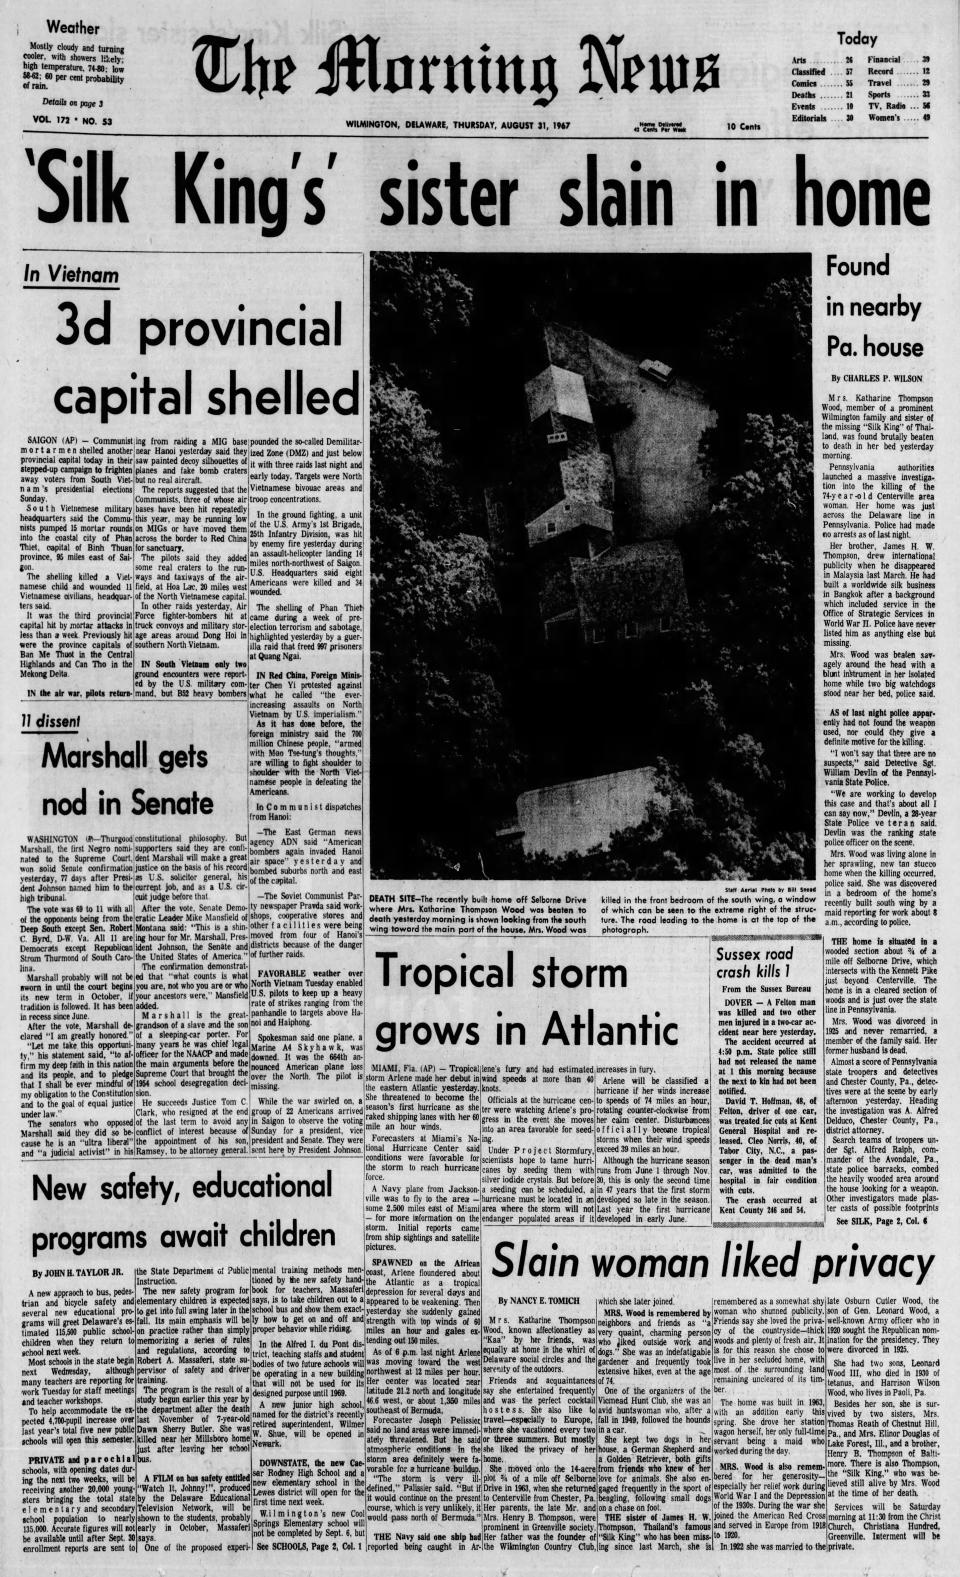 Front page of The Morning News from Aug. 31, 1967.